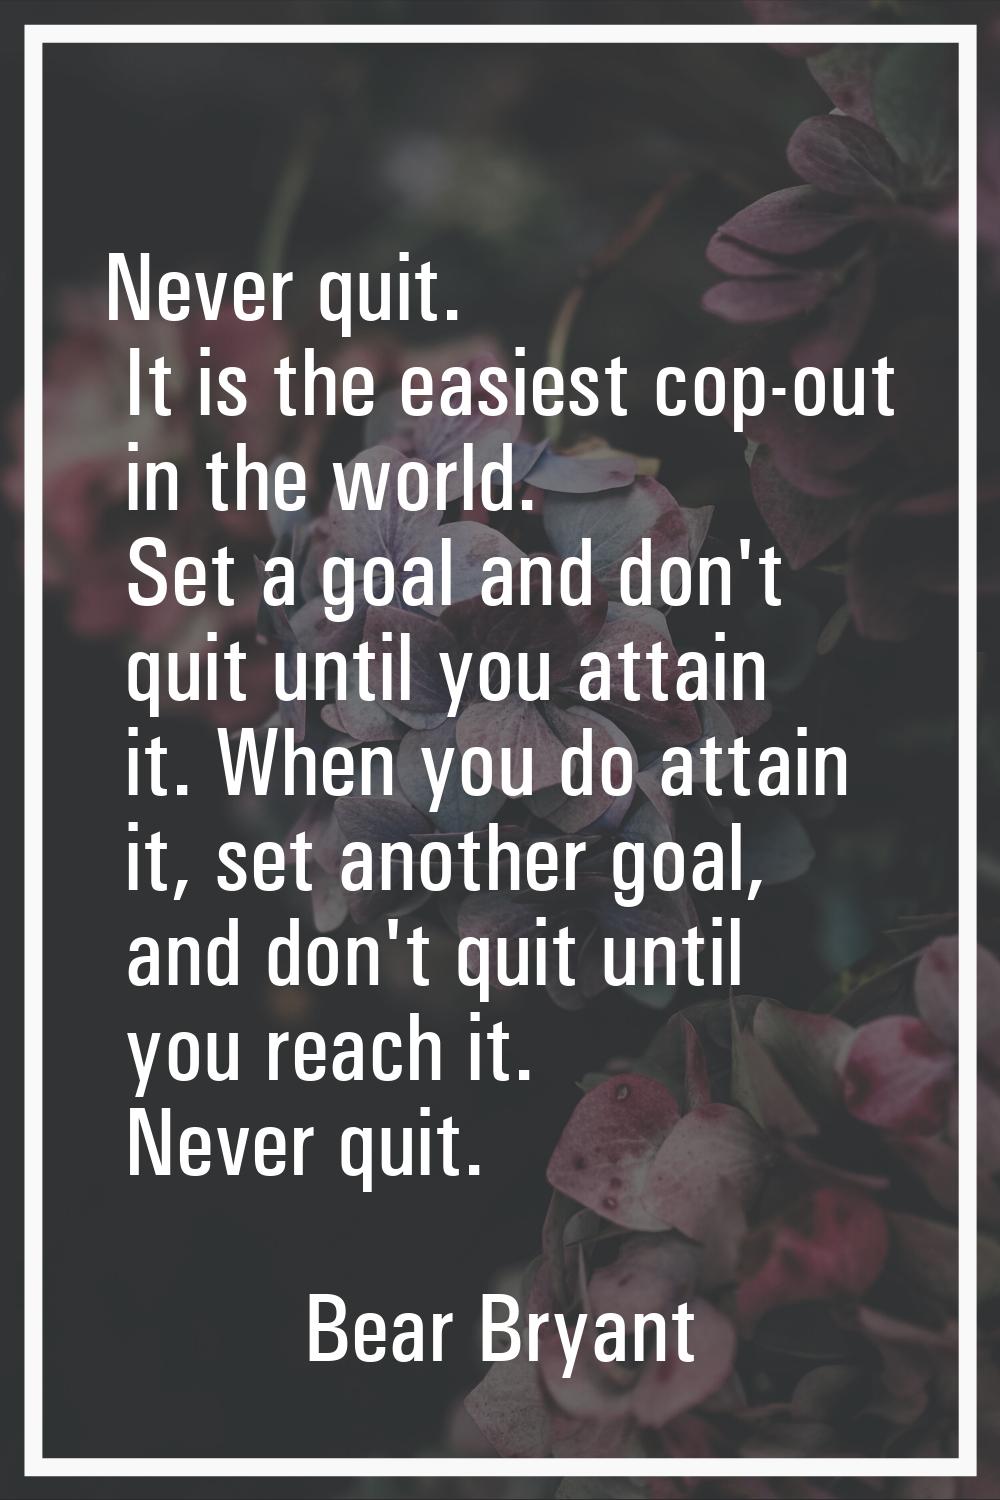 Never quit. It is the easiest cop-out in the world. Set a goal and don't quit until you attain it. 